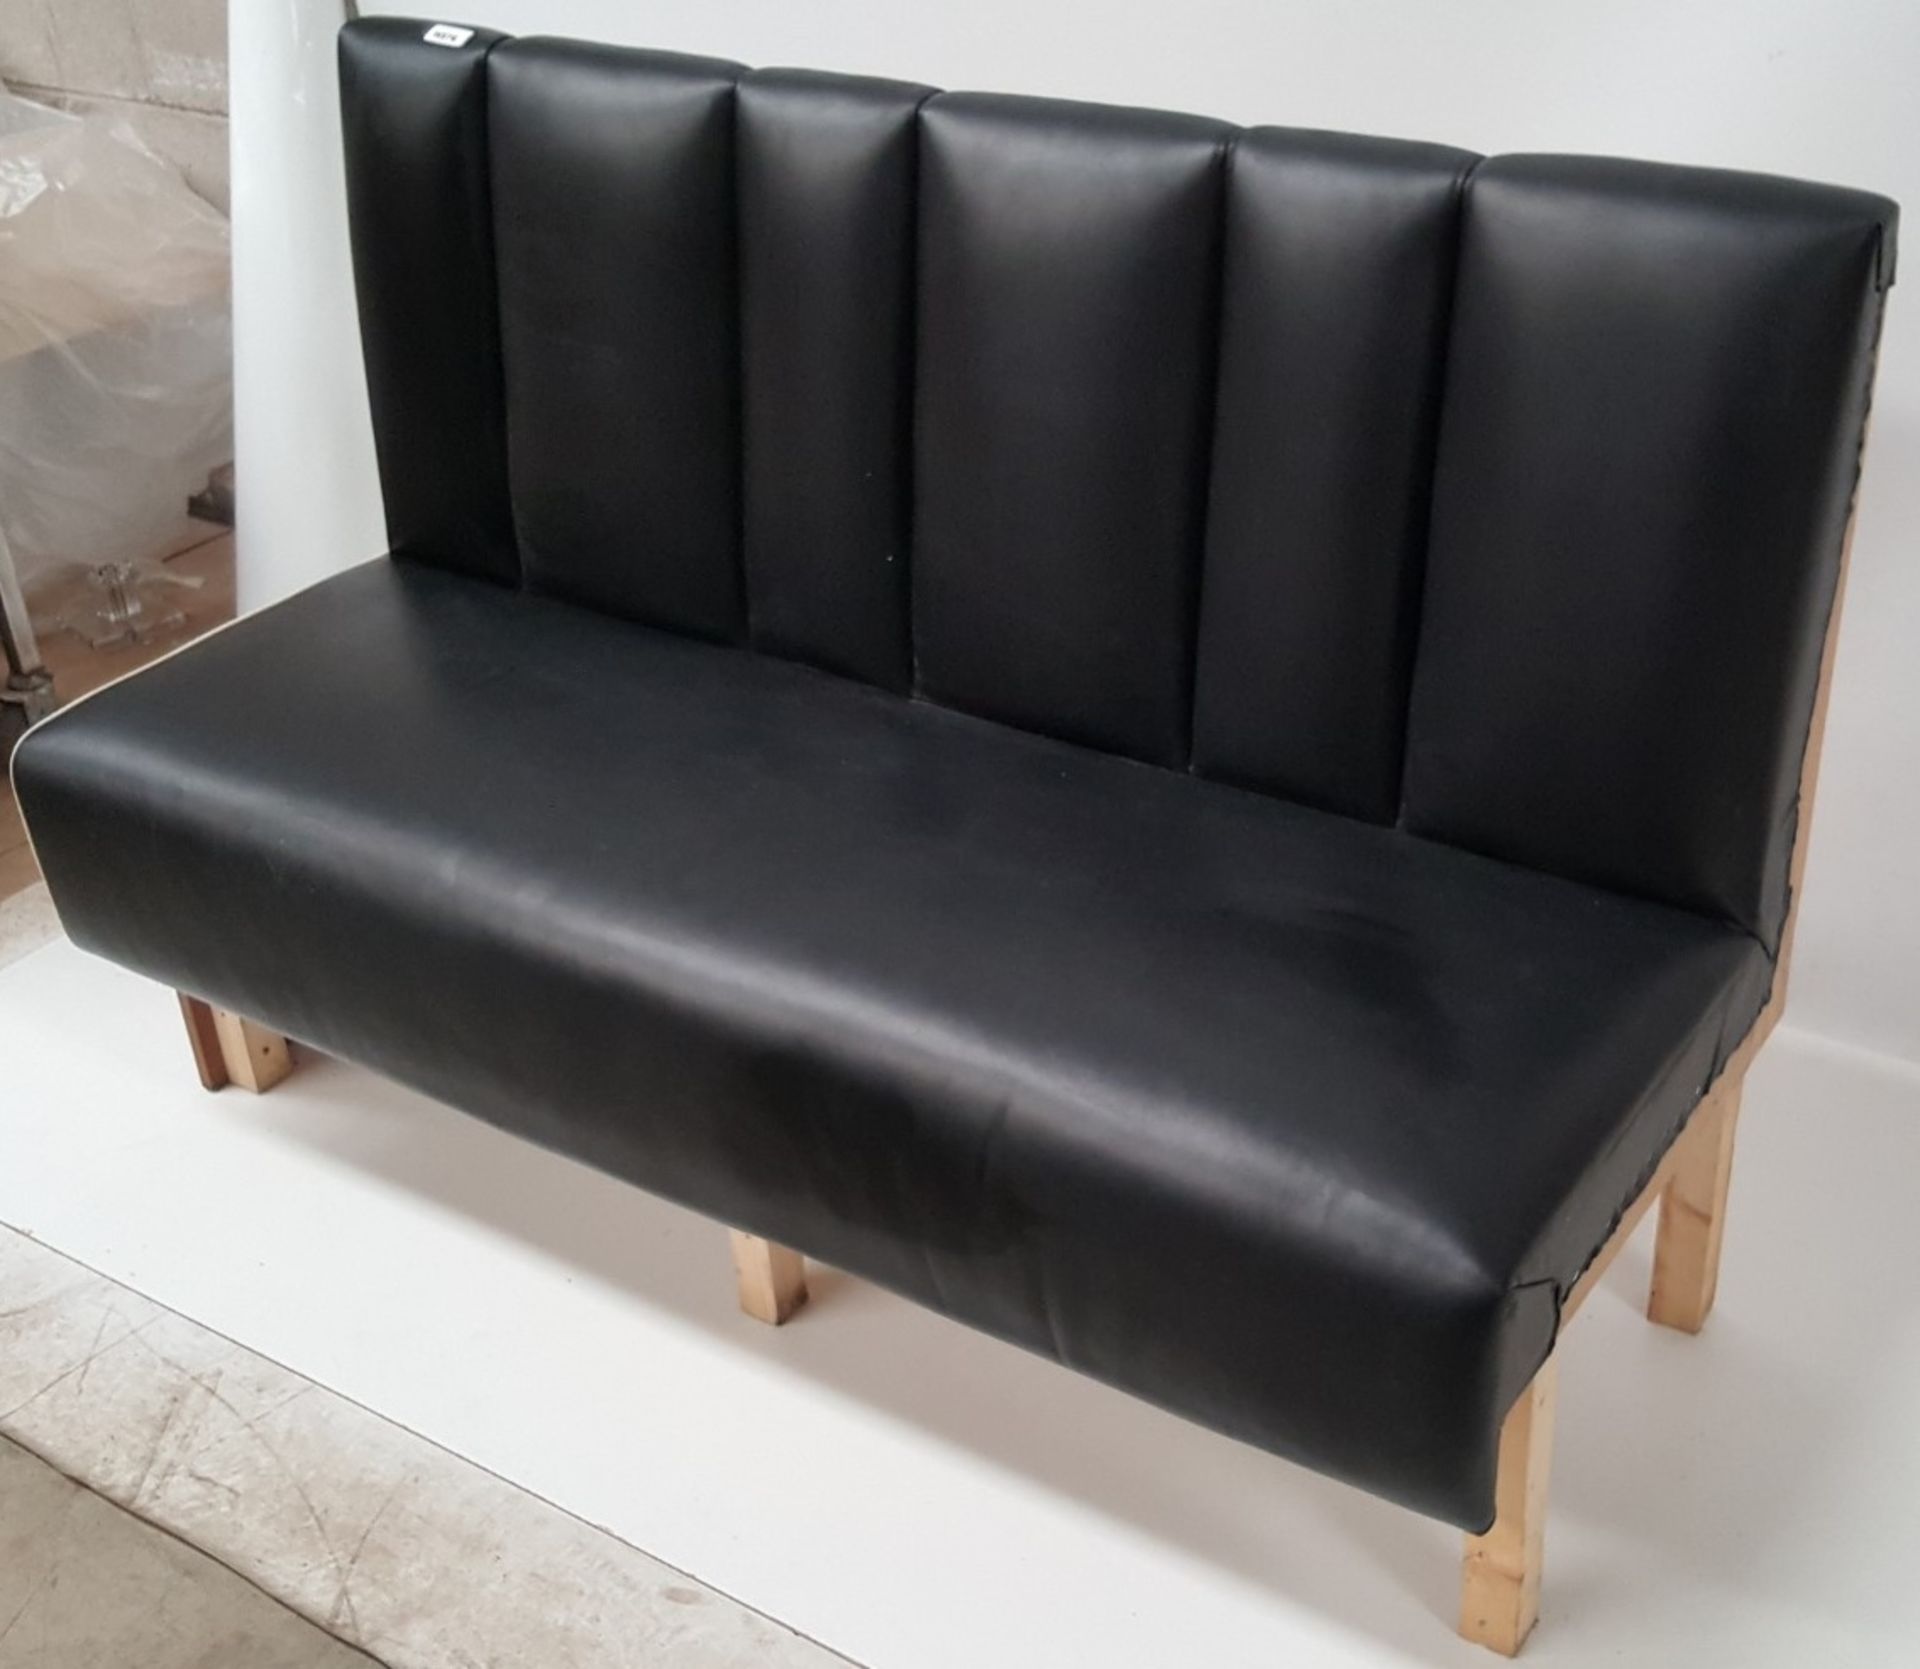 3 Pieces Of Black Upholstered Faux Leather Seating Booths - CL431 - Location: Altrincham WA14 - Image 16 of 19